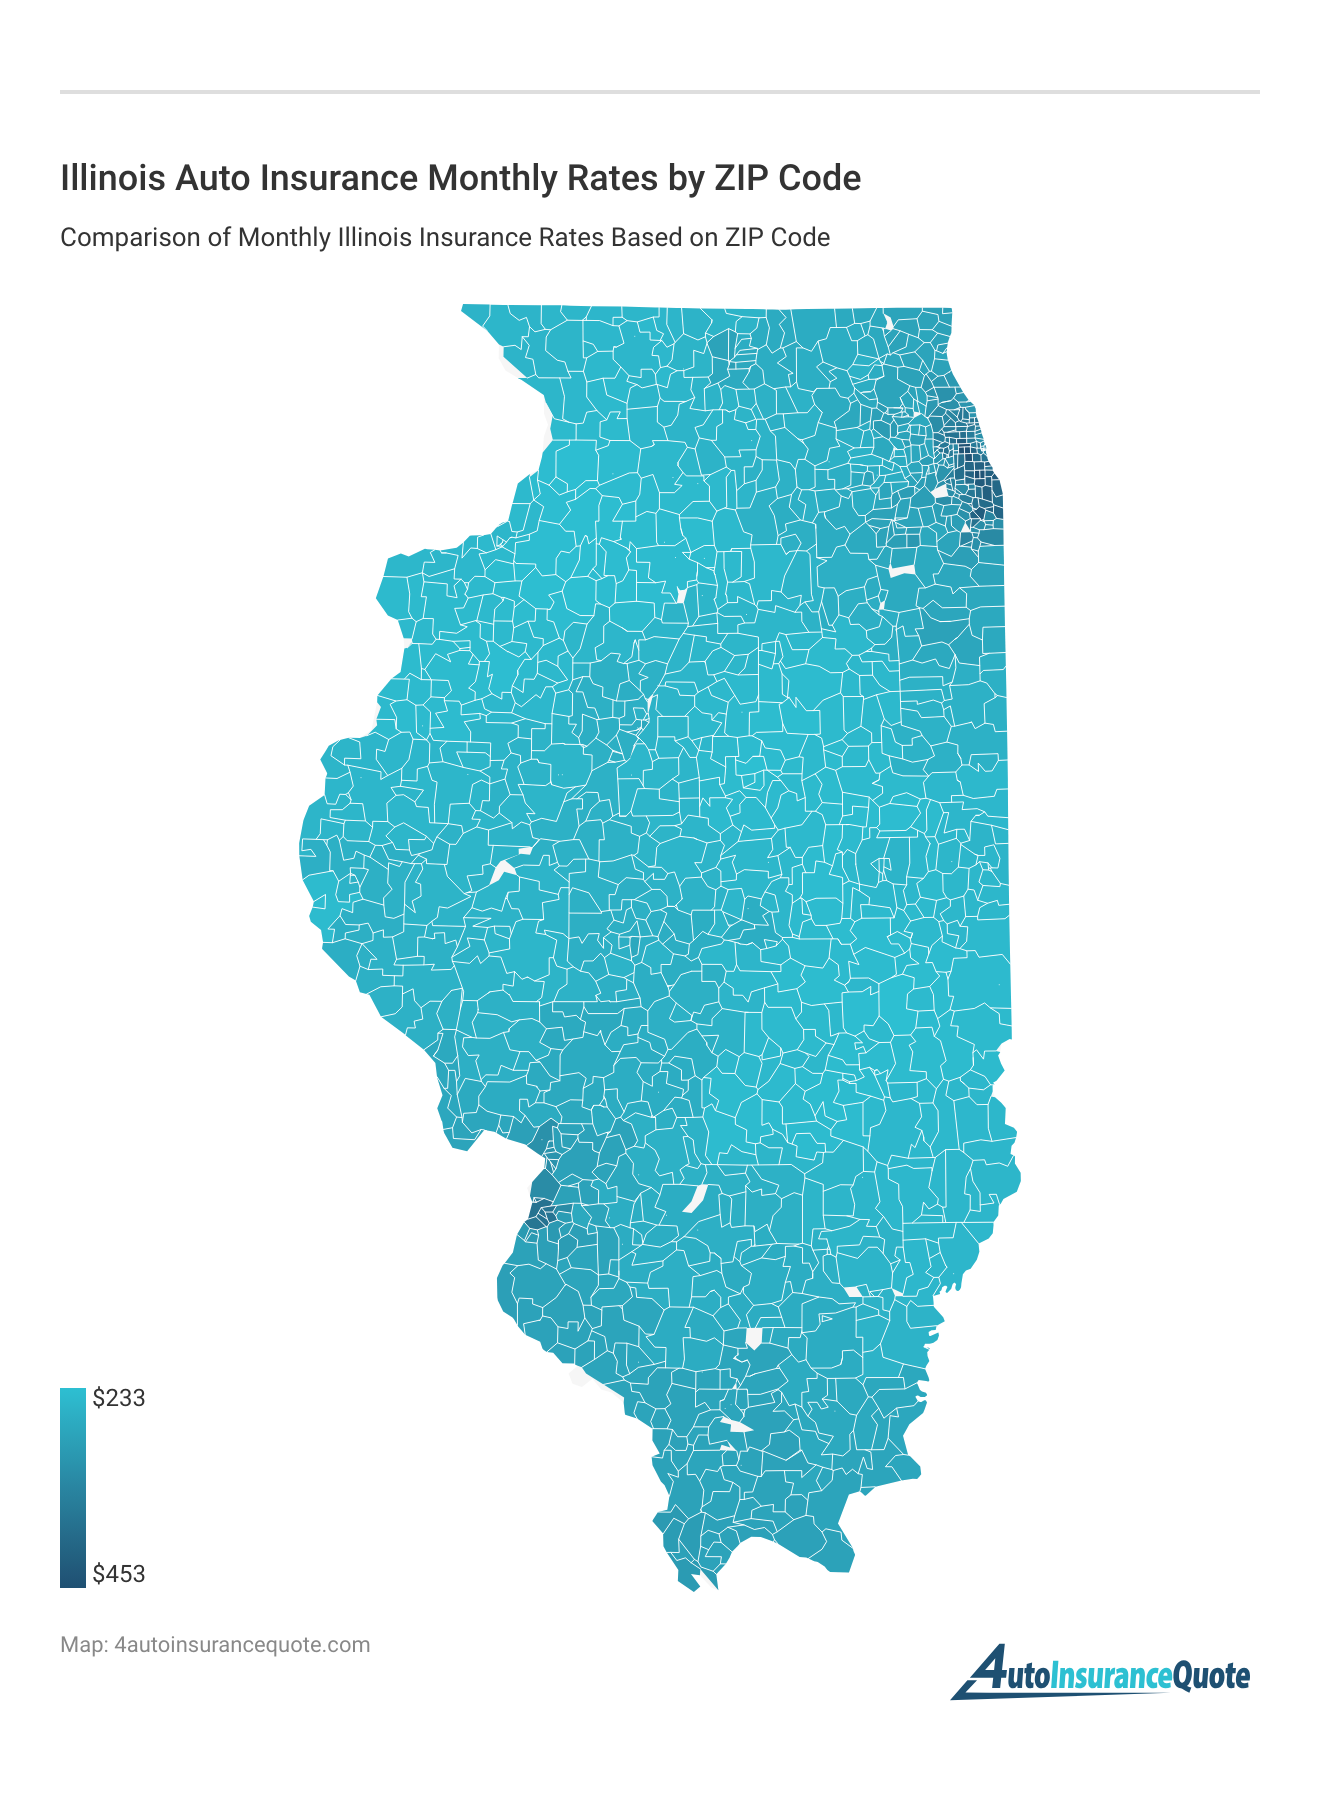 <h3>Illinois Auto Insurance Monthly Rates by ZIP Code</h3>